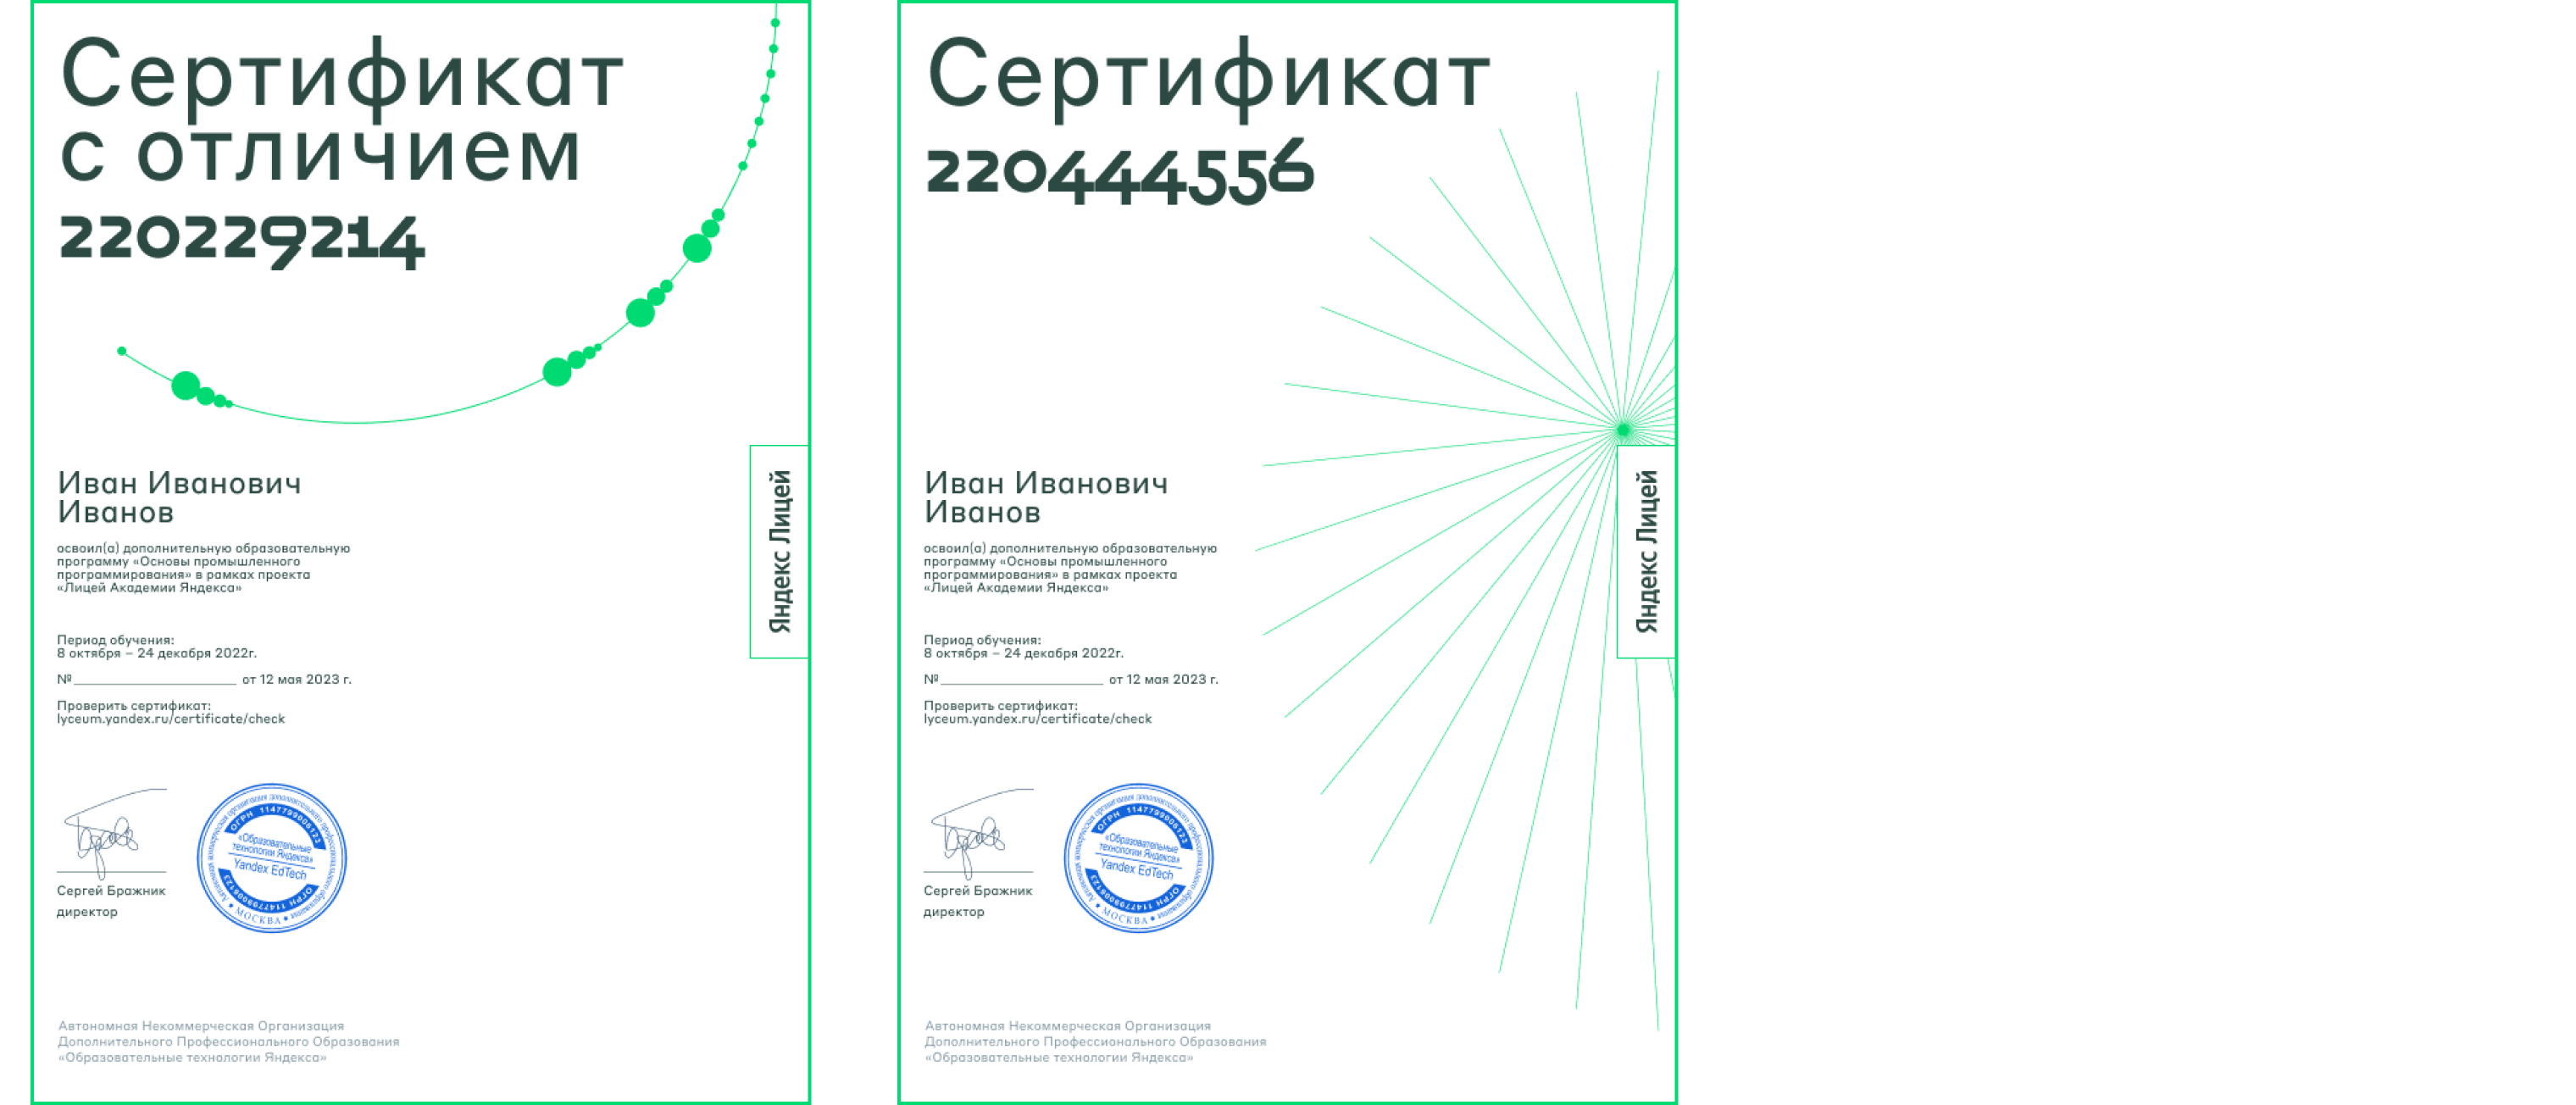 Иллюстрация блока <p class="paragraph"> <h3 class="features4_subtitle">Специализации</h3> </p><style>
.features4_subtitle {
   font-family: var(--font-family-primary);
   font-weight: 400;
   font-size: 18px;
   color: var(--color-text);
}
 @media (min-width: 1260px) {
  .features4_subtitle {
    font-size: 36px;
  }
}
</style>